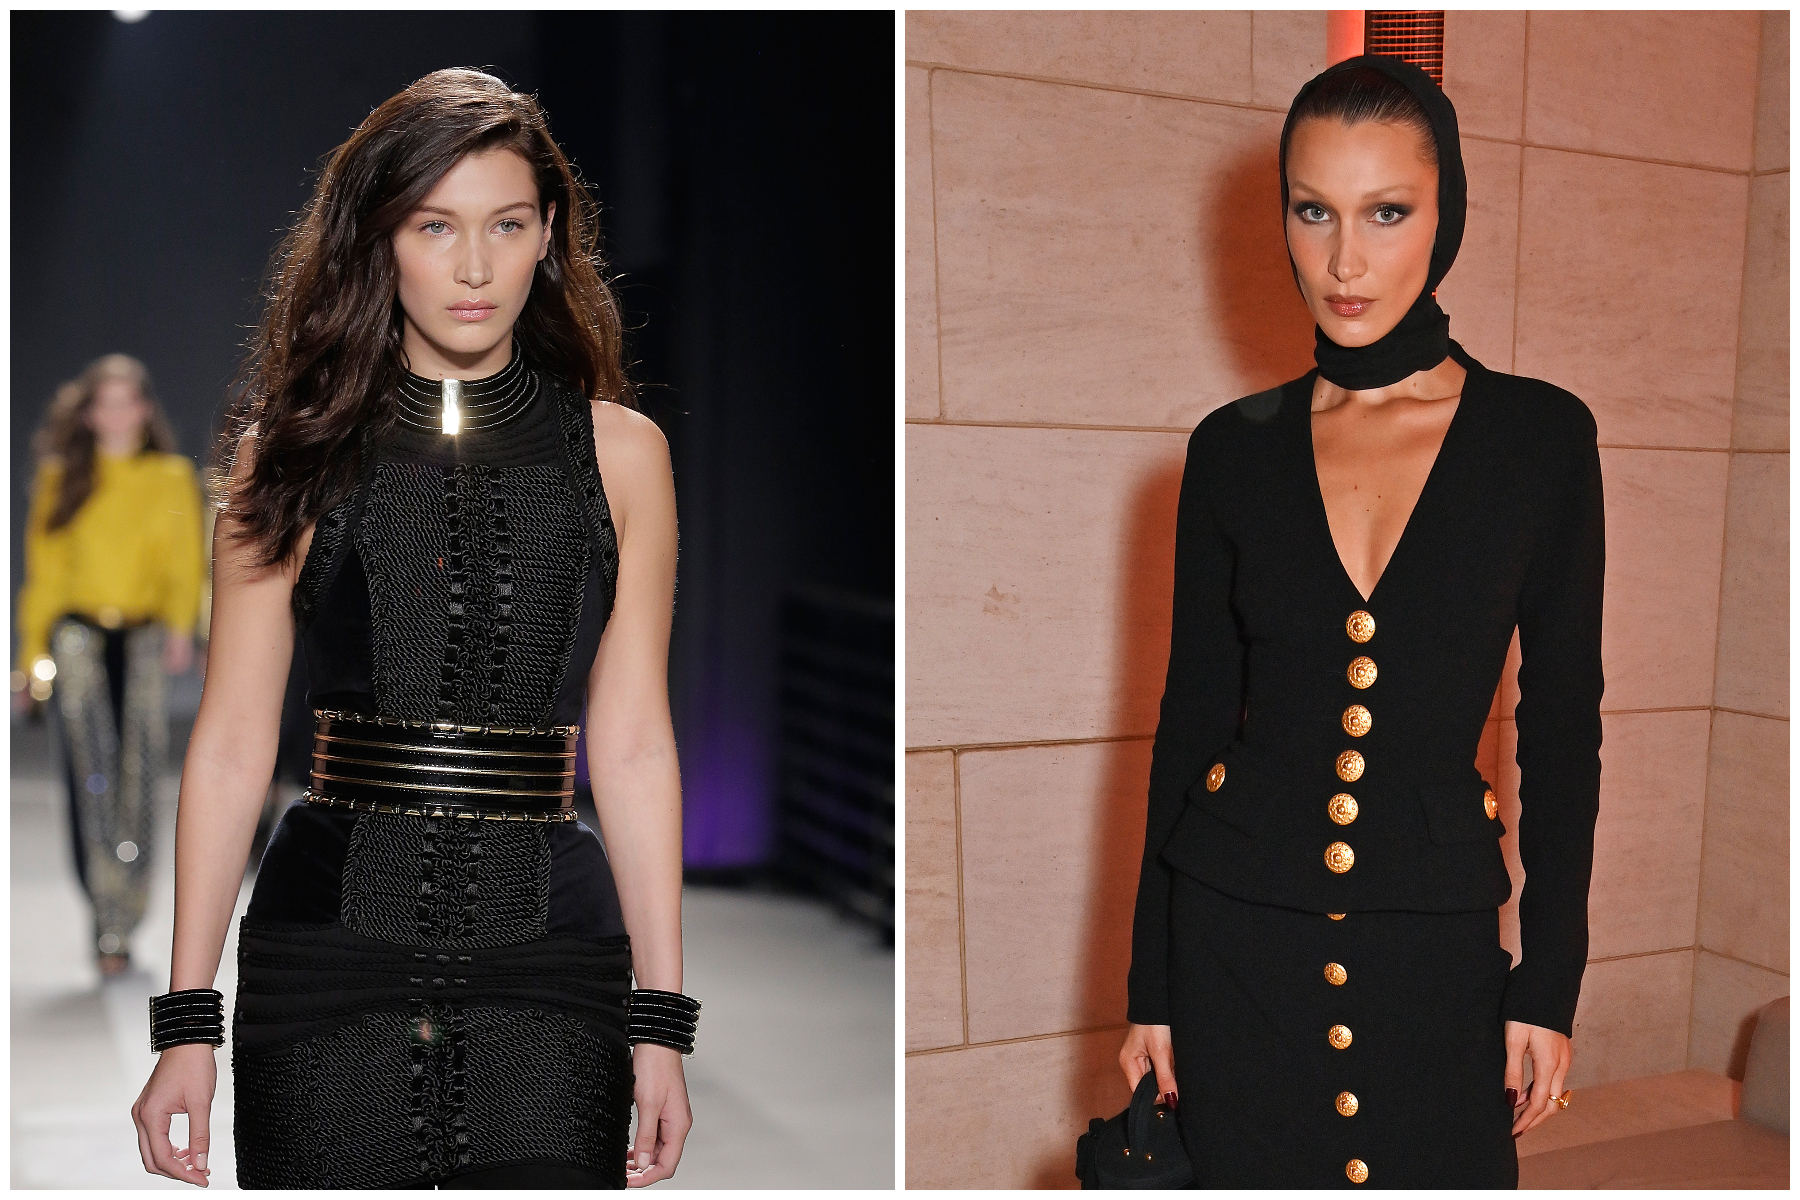 Bella Hadid before and after: The model's biography and Lyme disease struggle